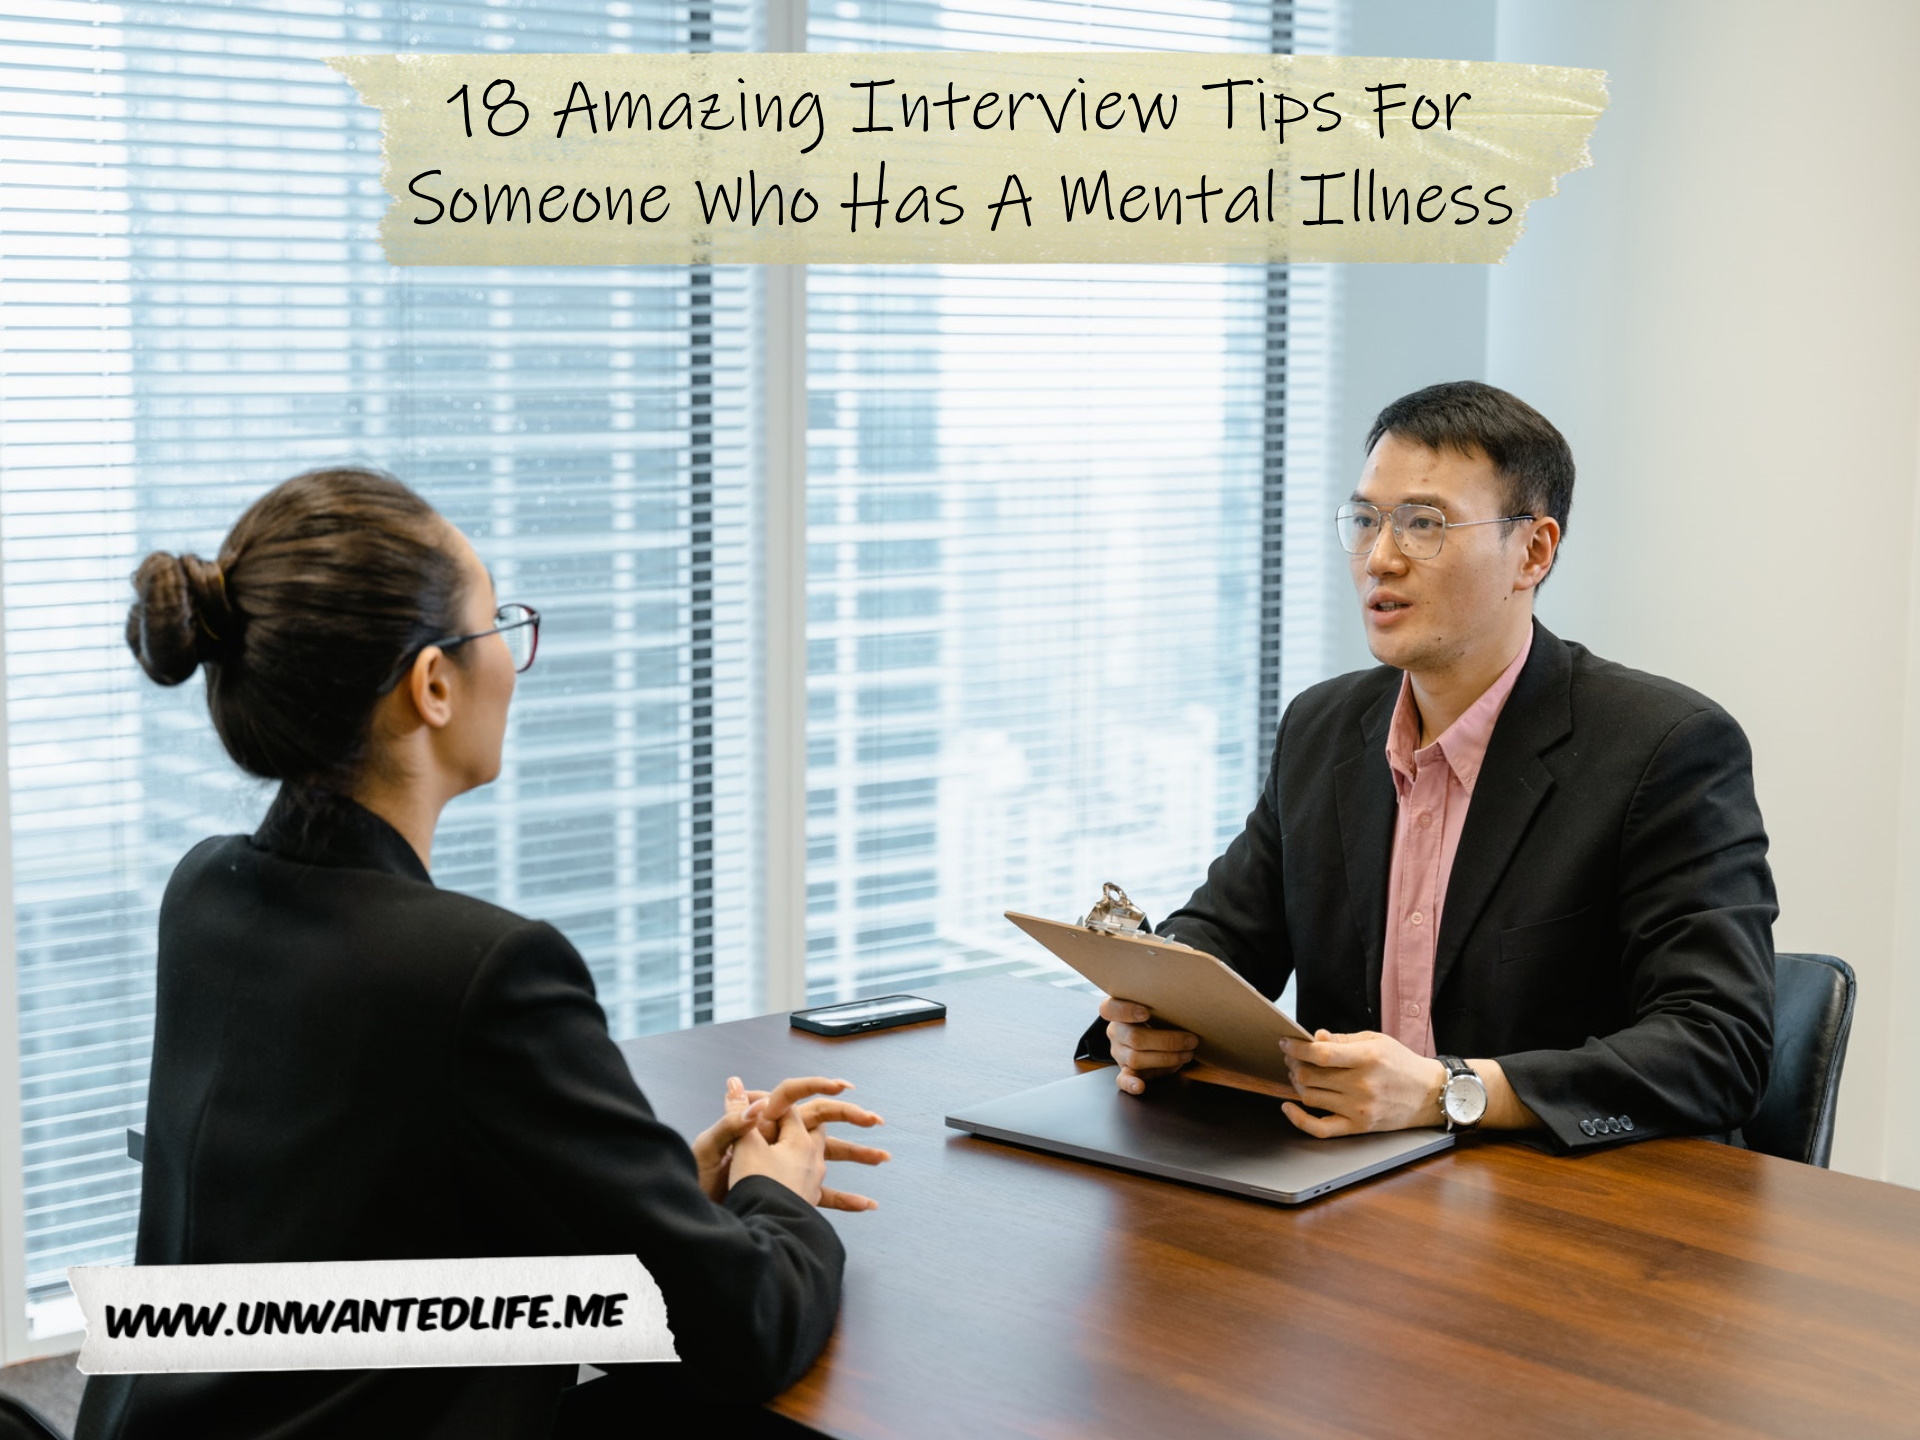 A photo of an Asian man interviewing an Asian woman to represent the topic of the article - 18 Amazing Interview Tips For Someone Who Has A Mental Illness